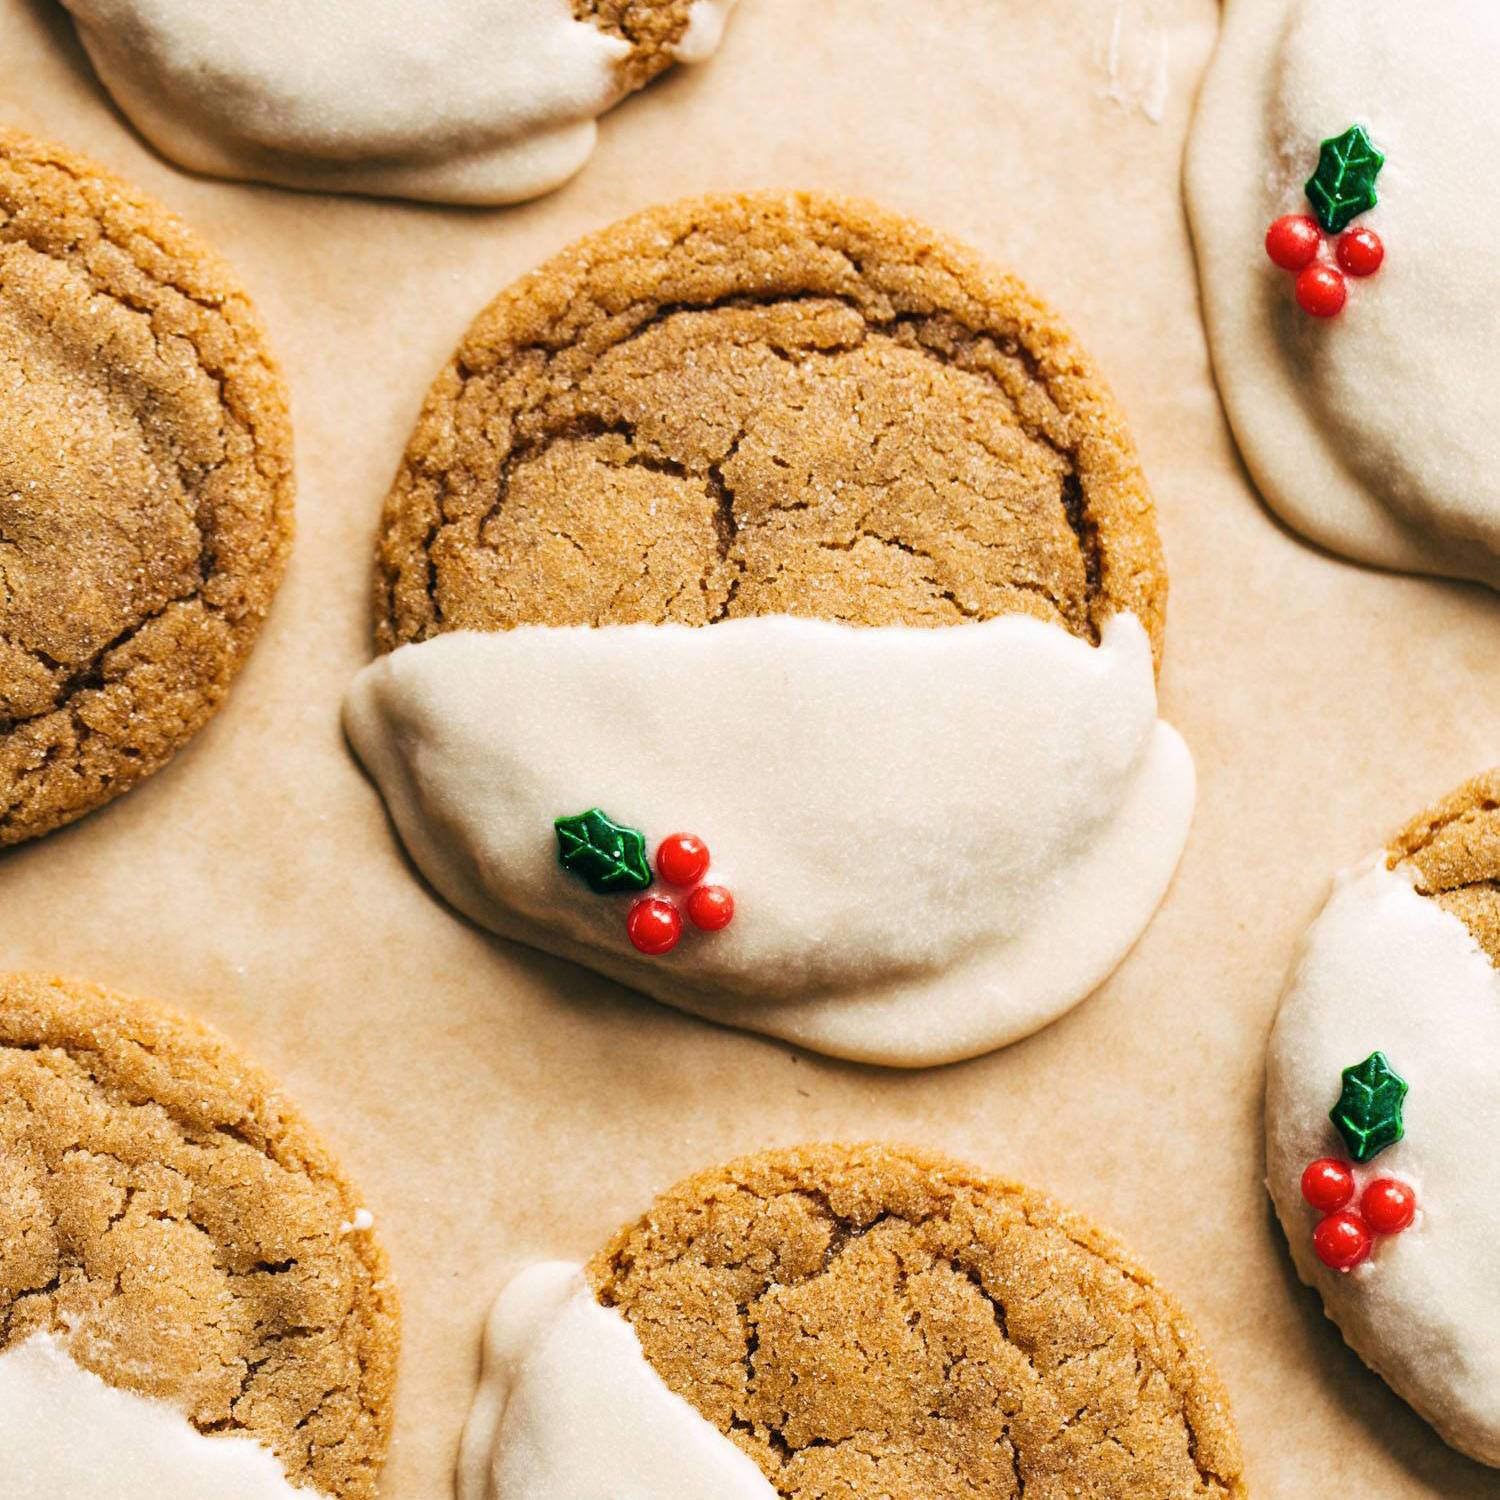 Soft Gingerbread Cookies with Maple Glaze